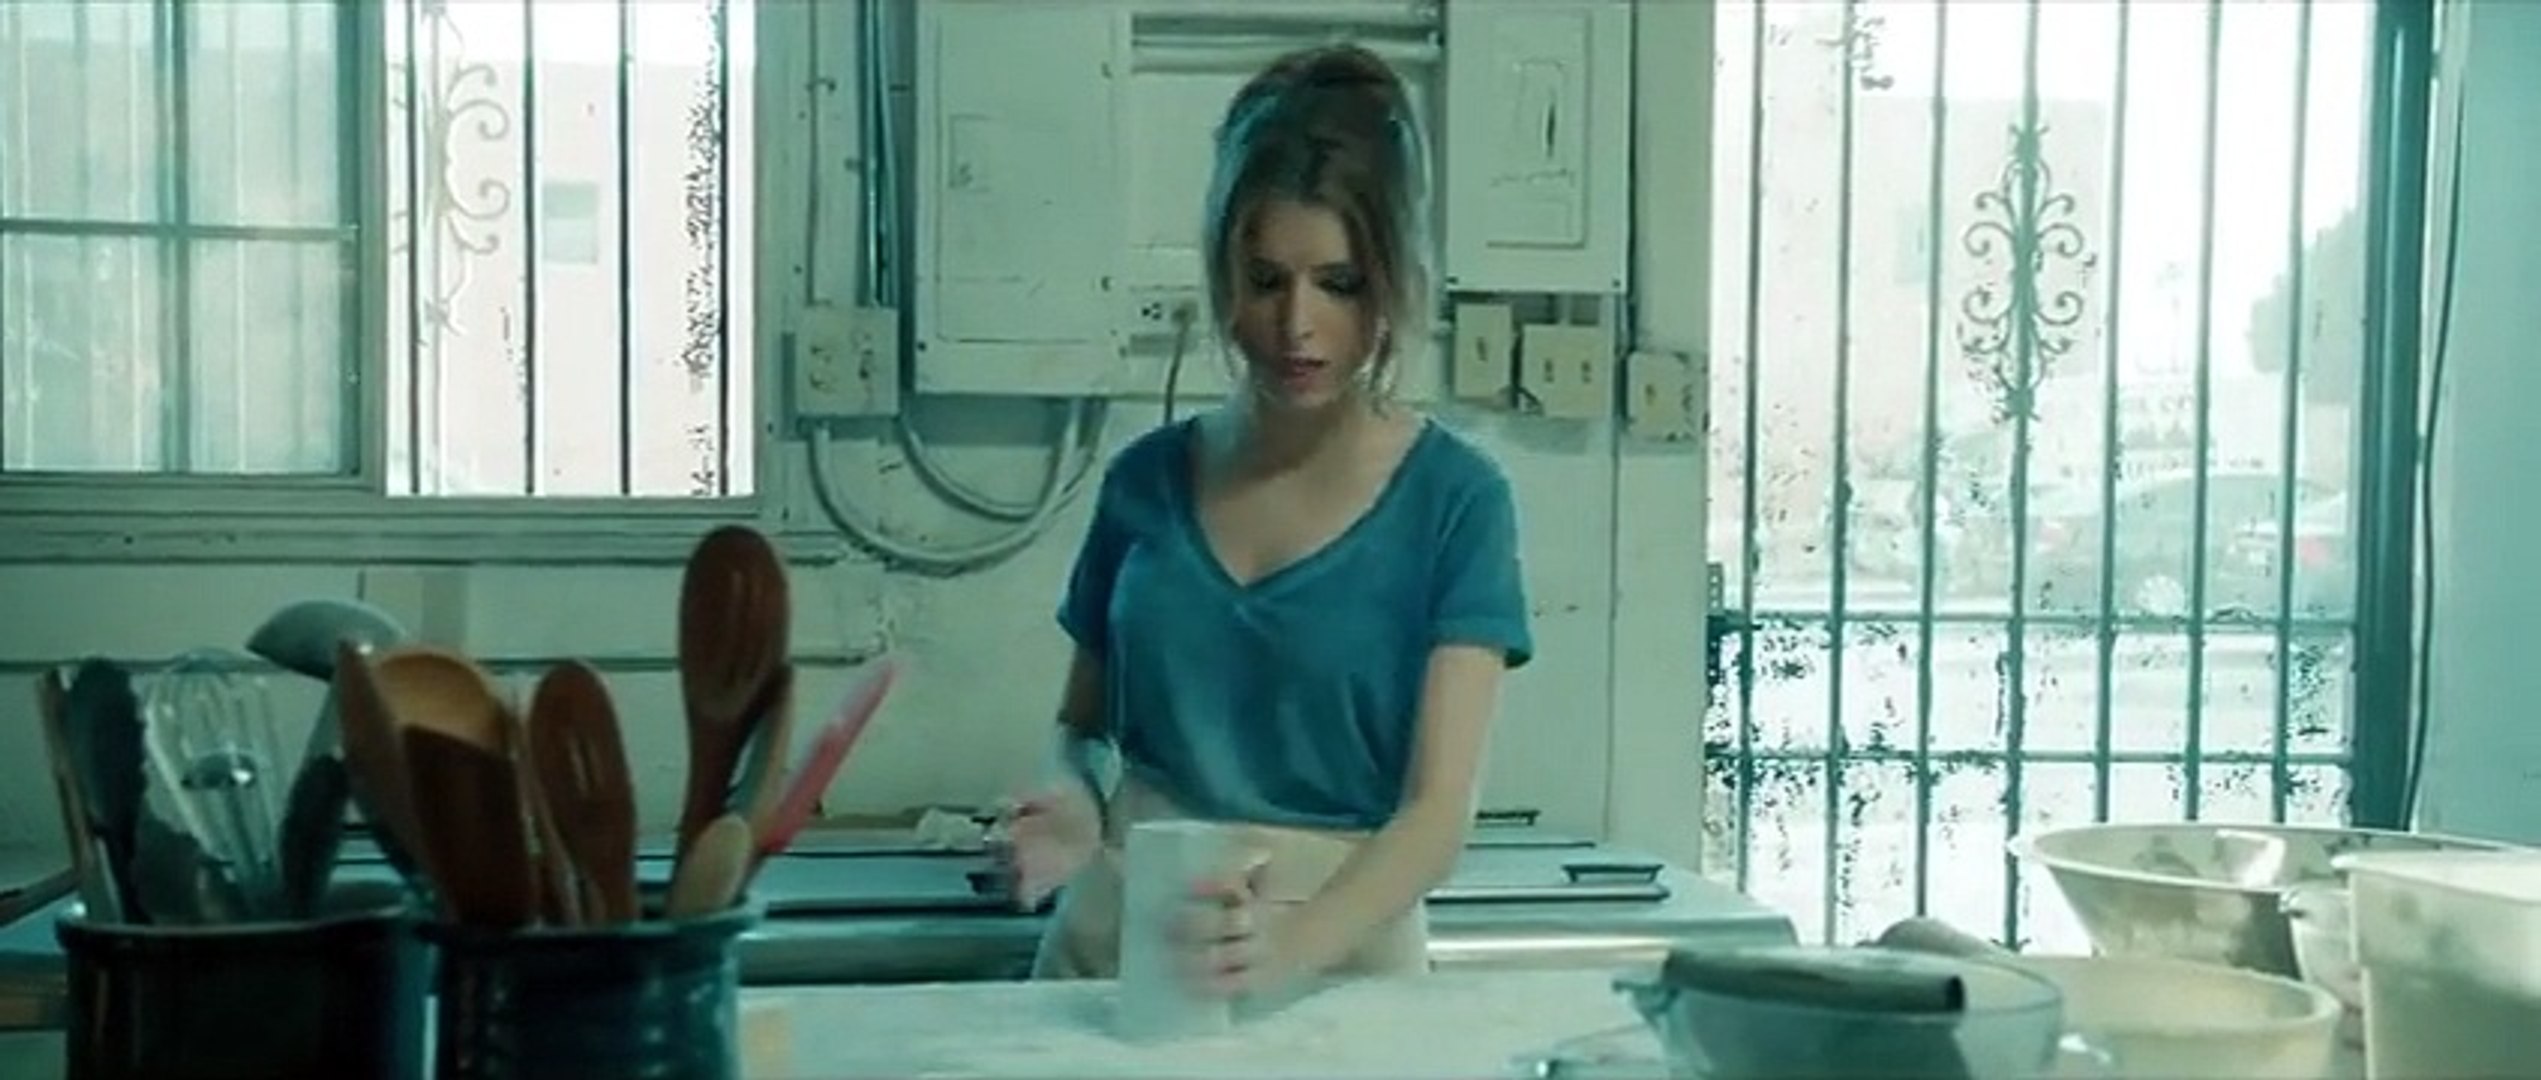 Anna Kendrick - Cups - Dailymotion Video